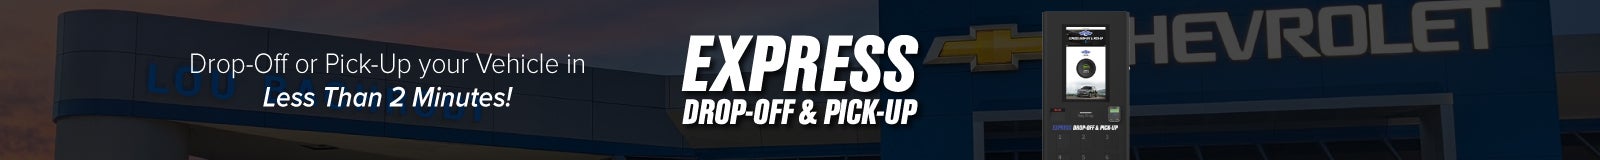 express drop off and pick up